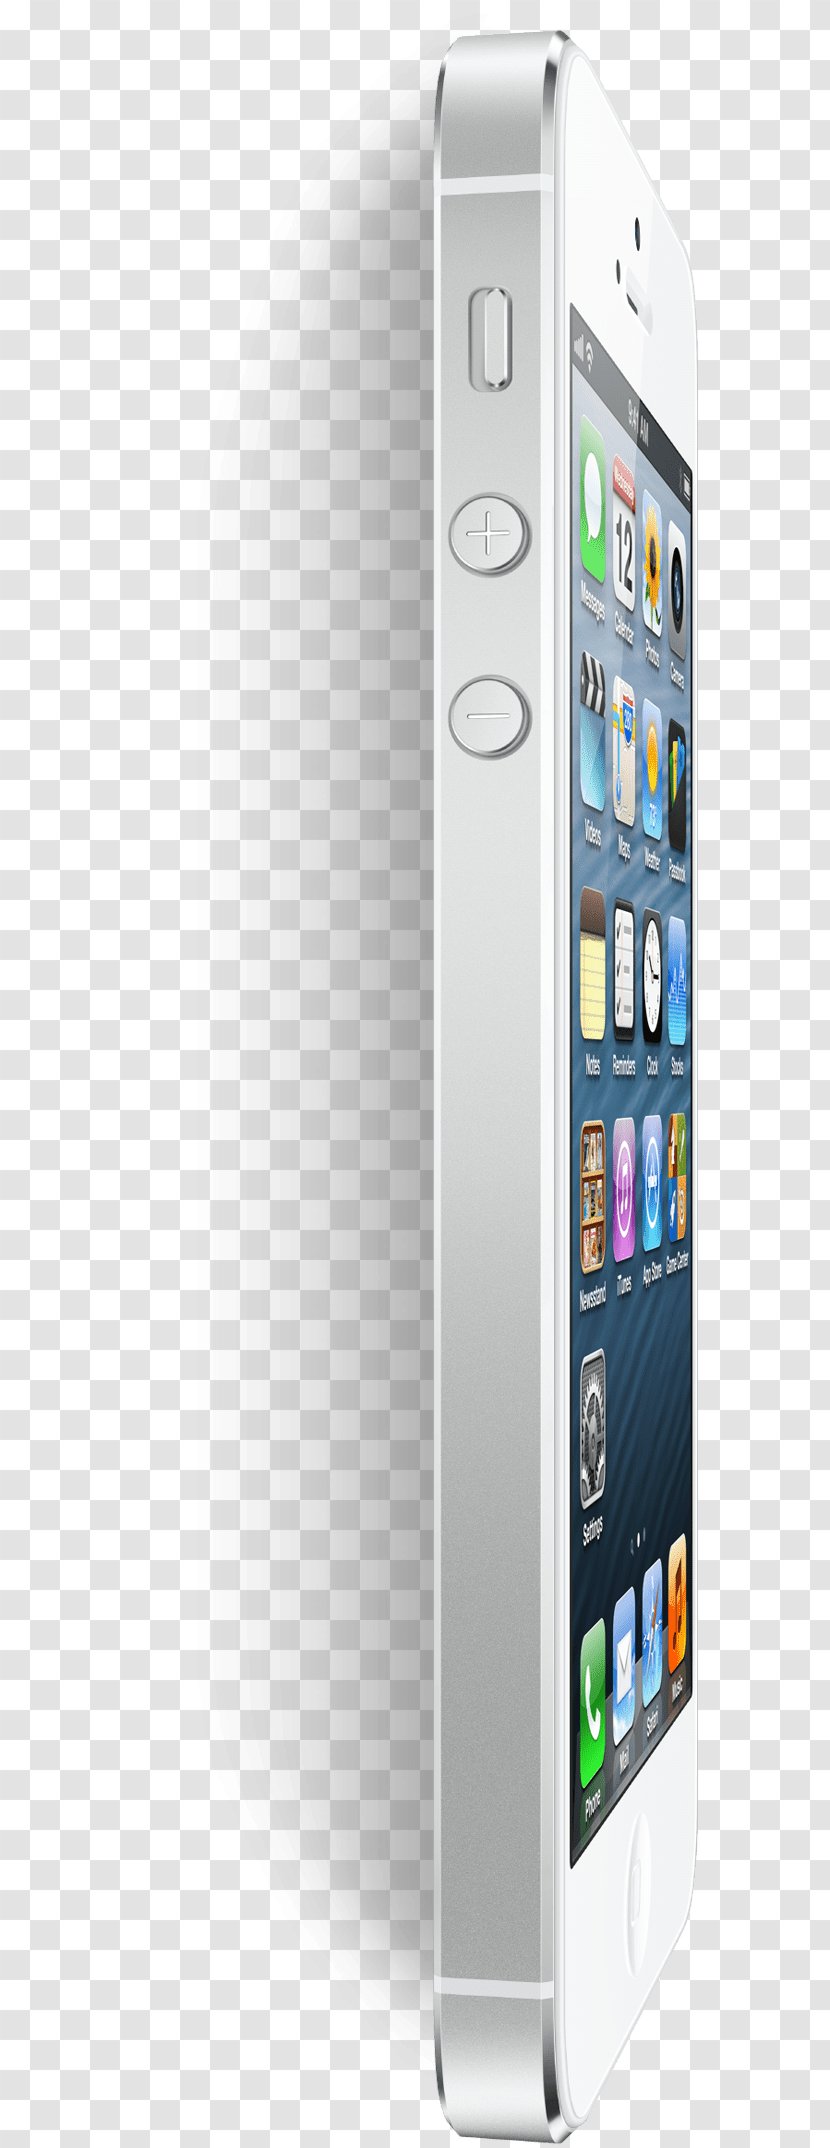 IPhone 5s 4S 7 - Facetime - Iphone Apple Transparent PNG